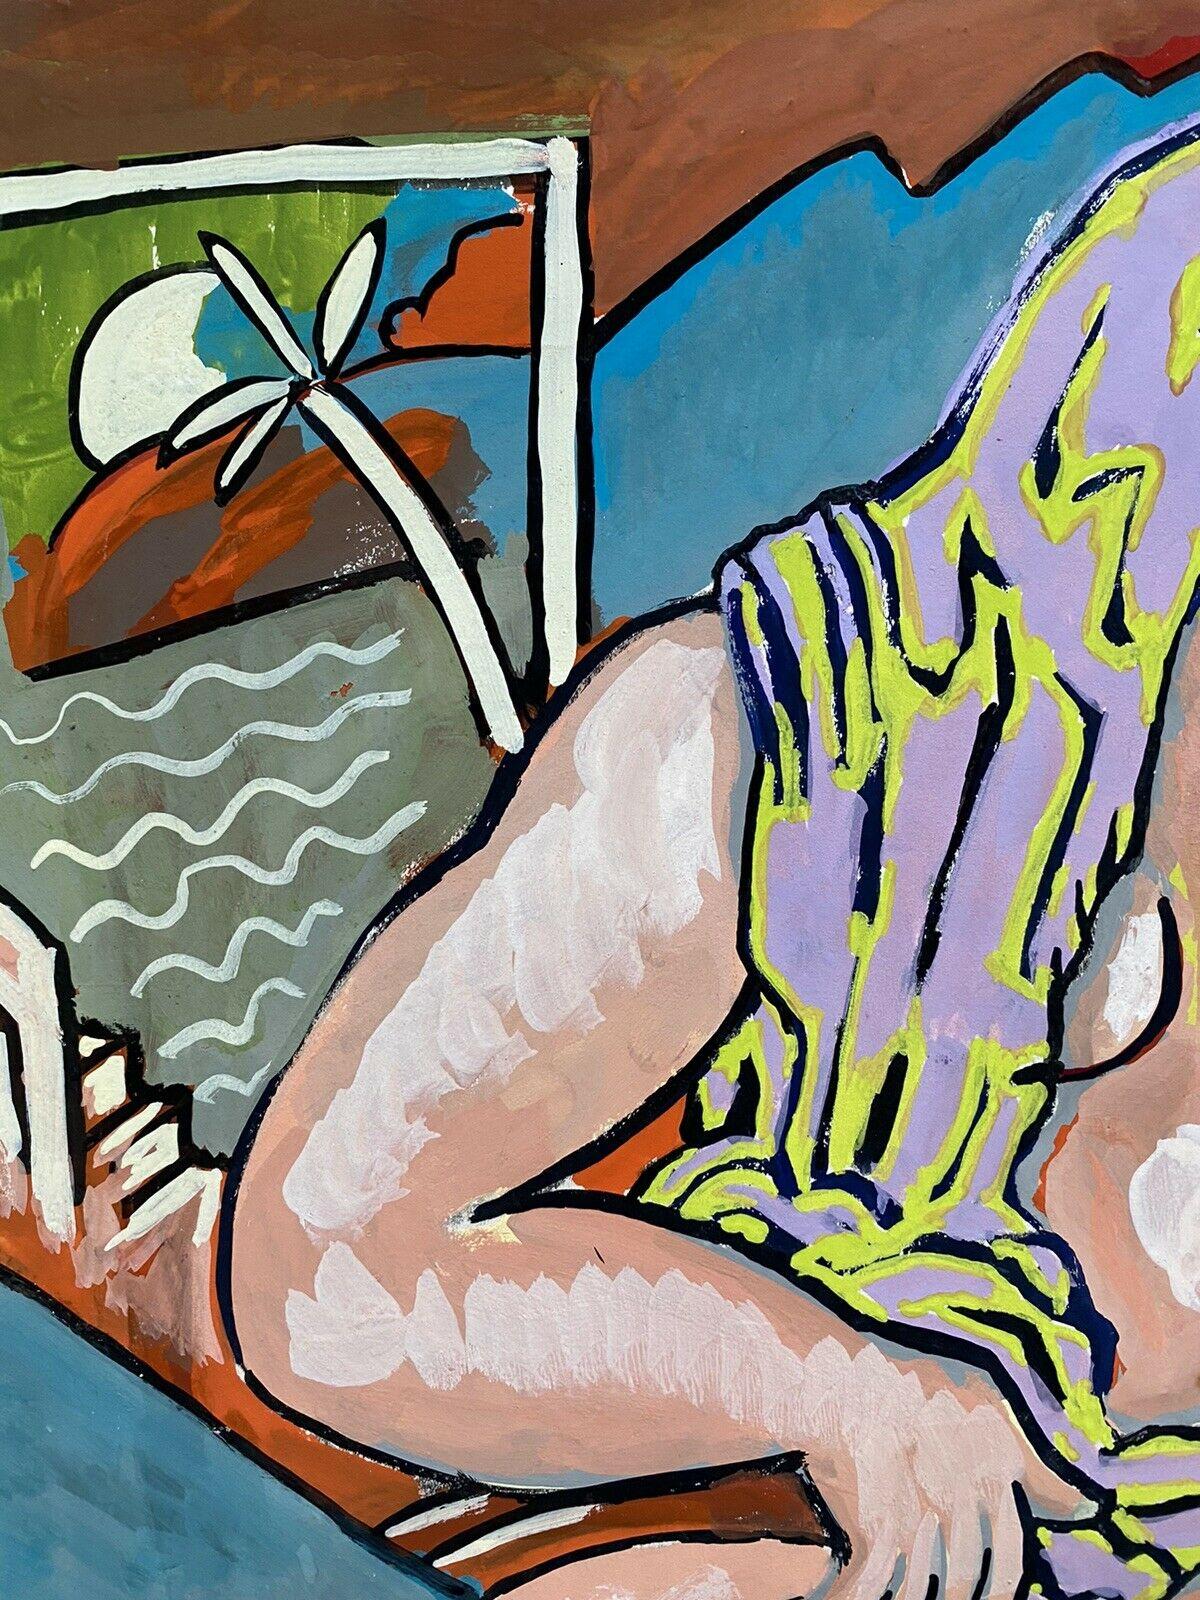 20th CENTURY FRENCH MODERNIST PAINTING - NUDE FIGURE COLORFUL INTERIOR For Sale 1